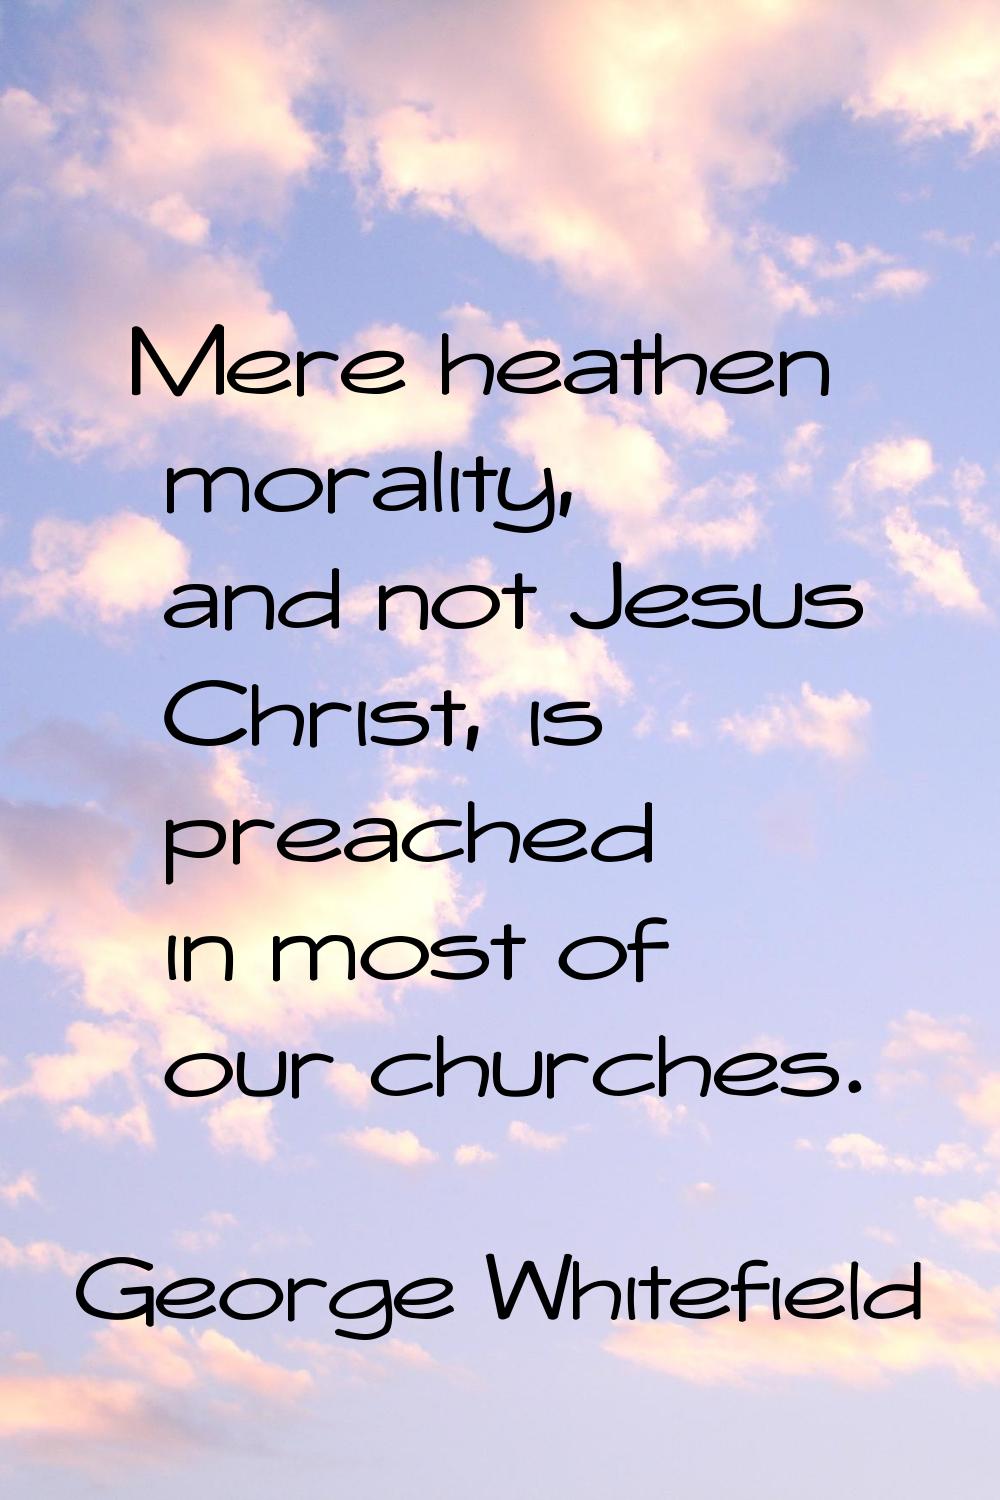 Mere heathen morality, and not Jesus Christ, is preached in most of our churches.